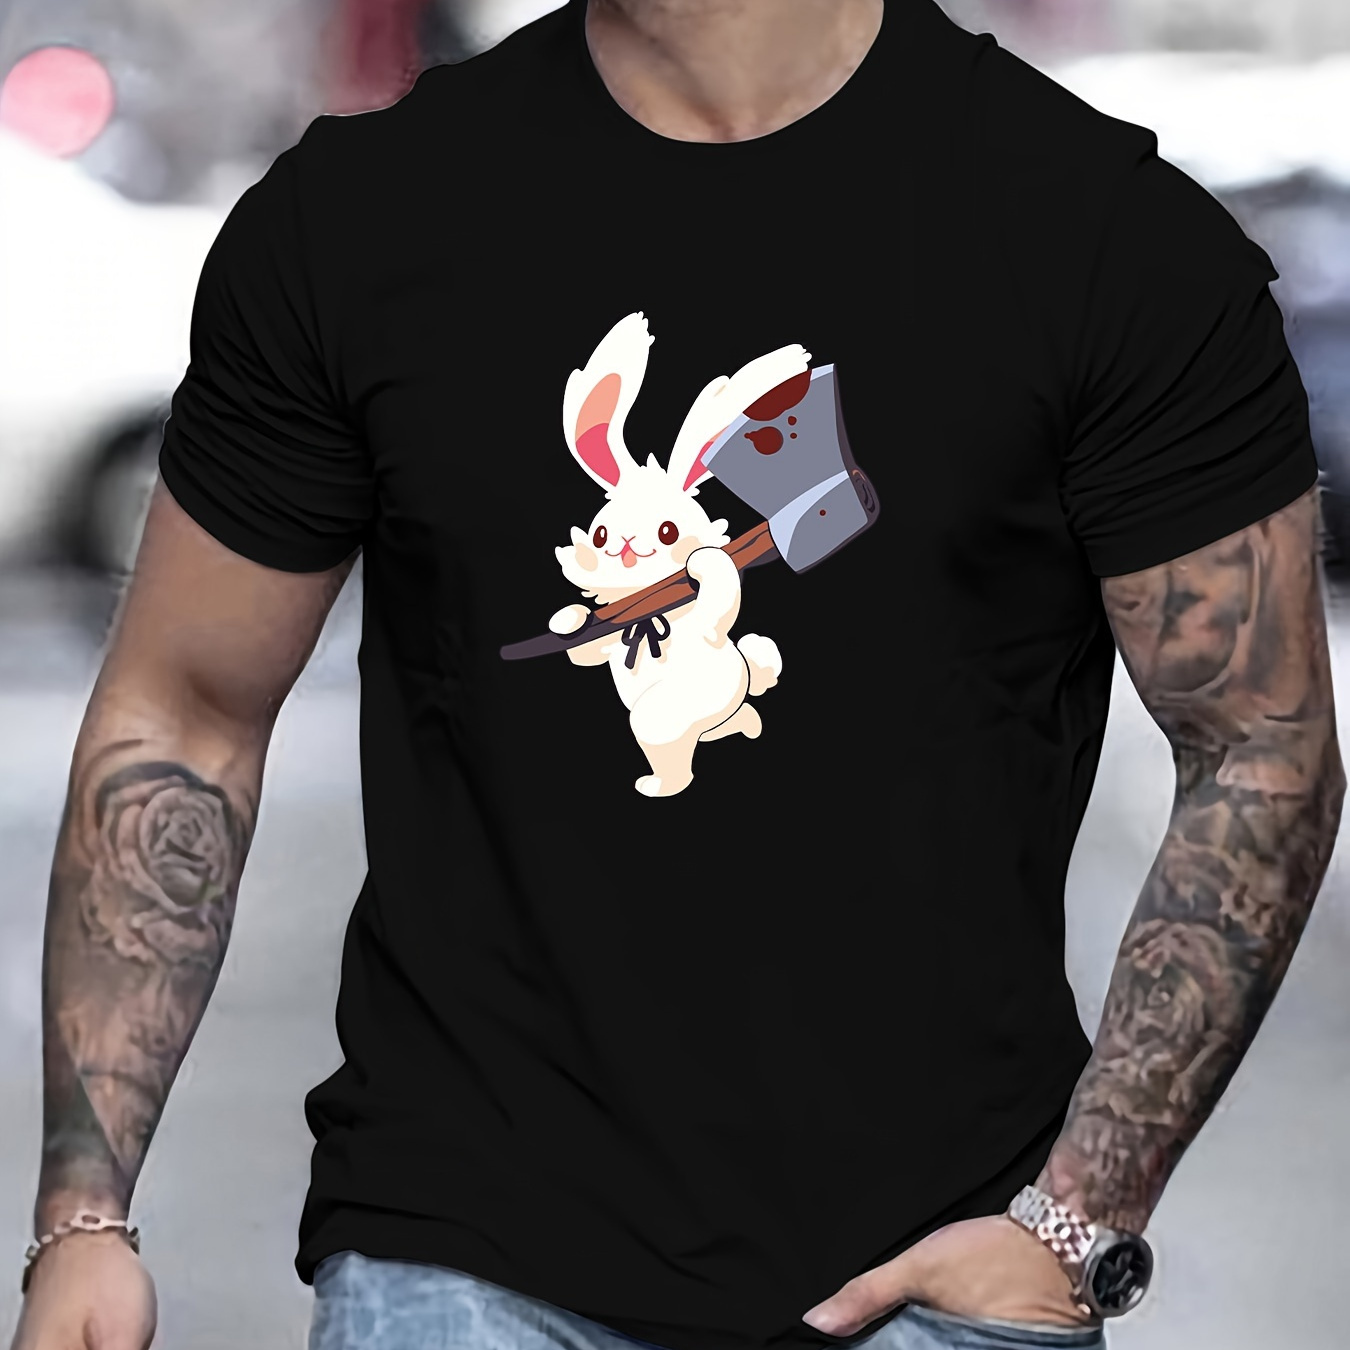 

Rabbit With An Axe Cartoon Pattern Men's Casual Round Neck Short T-sleeves, Casual And Comfy Summer T-shirt For Daily Wear And Vacation Resorts